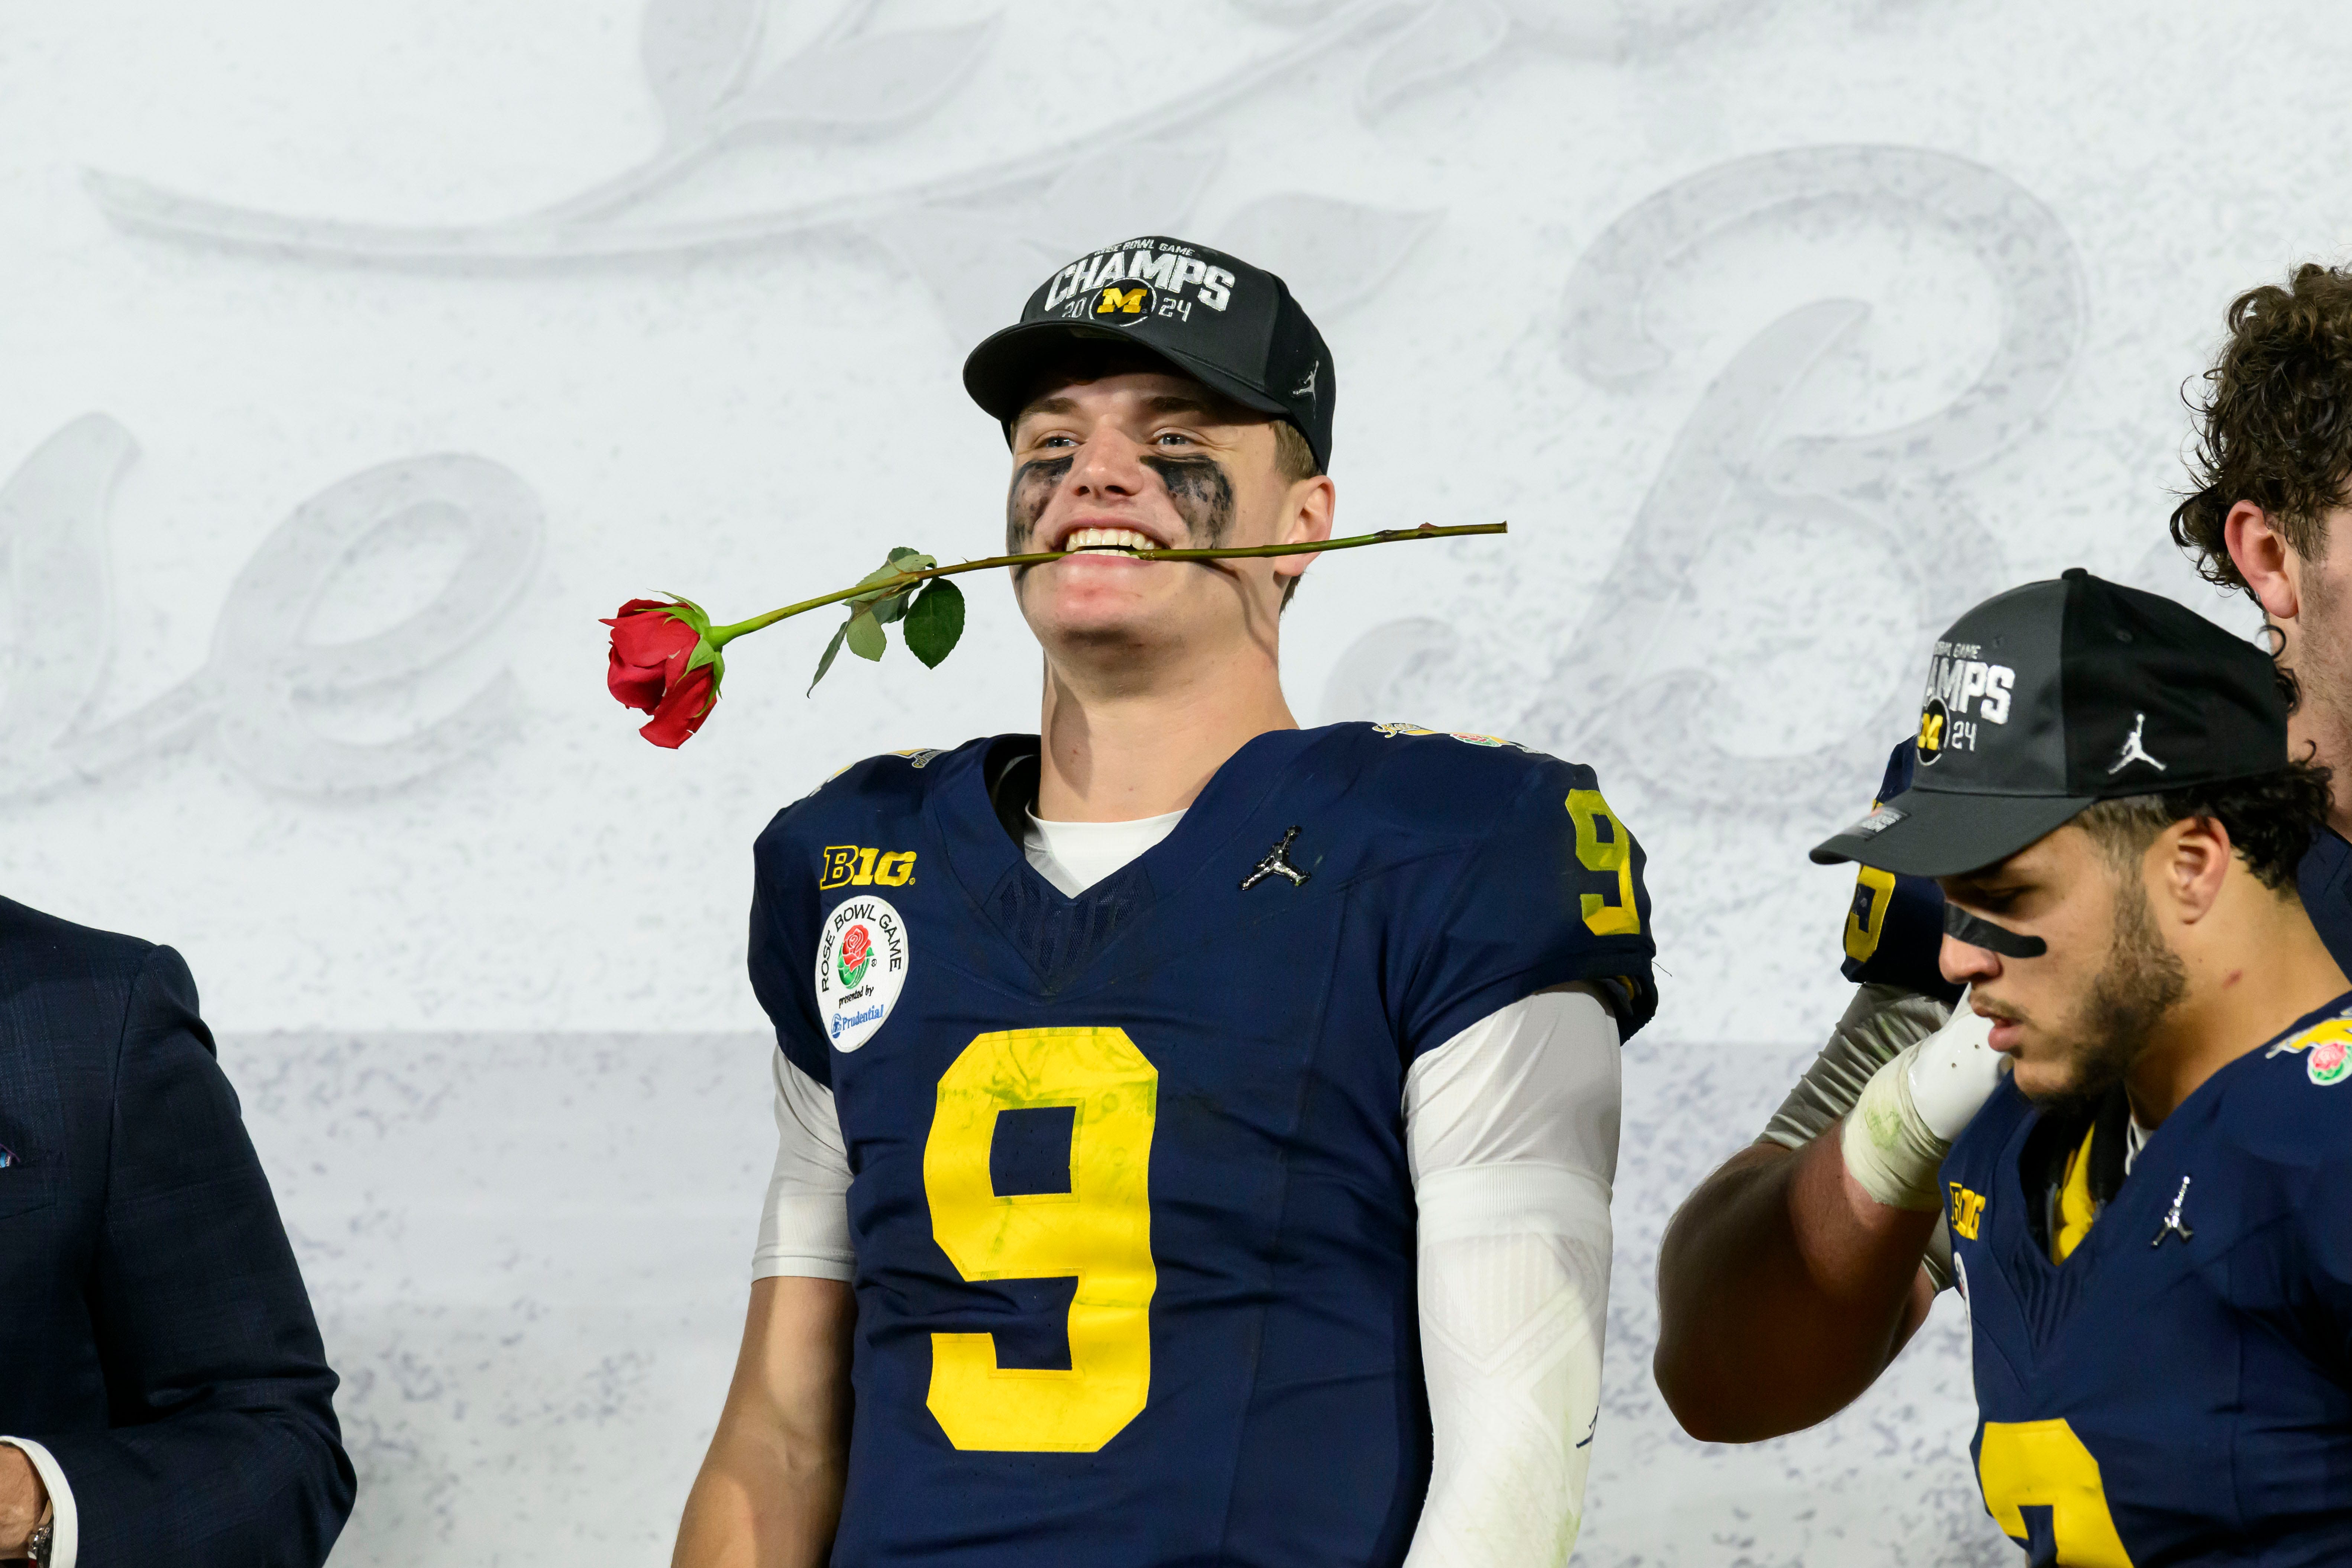 Michigan quarterback J.J. McCarthy sticks a rose in his mouth after the University of Michigan defeated Alabama University 27-20 in overtime at the Rose Bowl, in Pasadena, California, January 1, 2024.